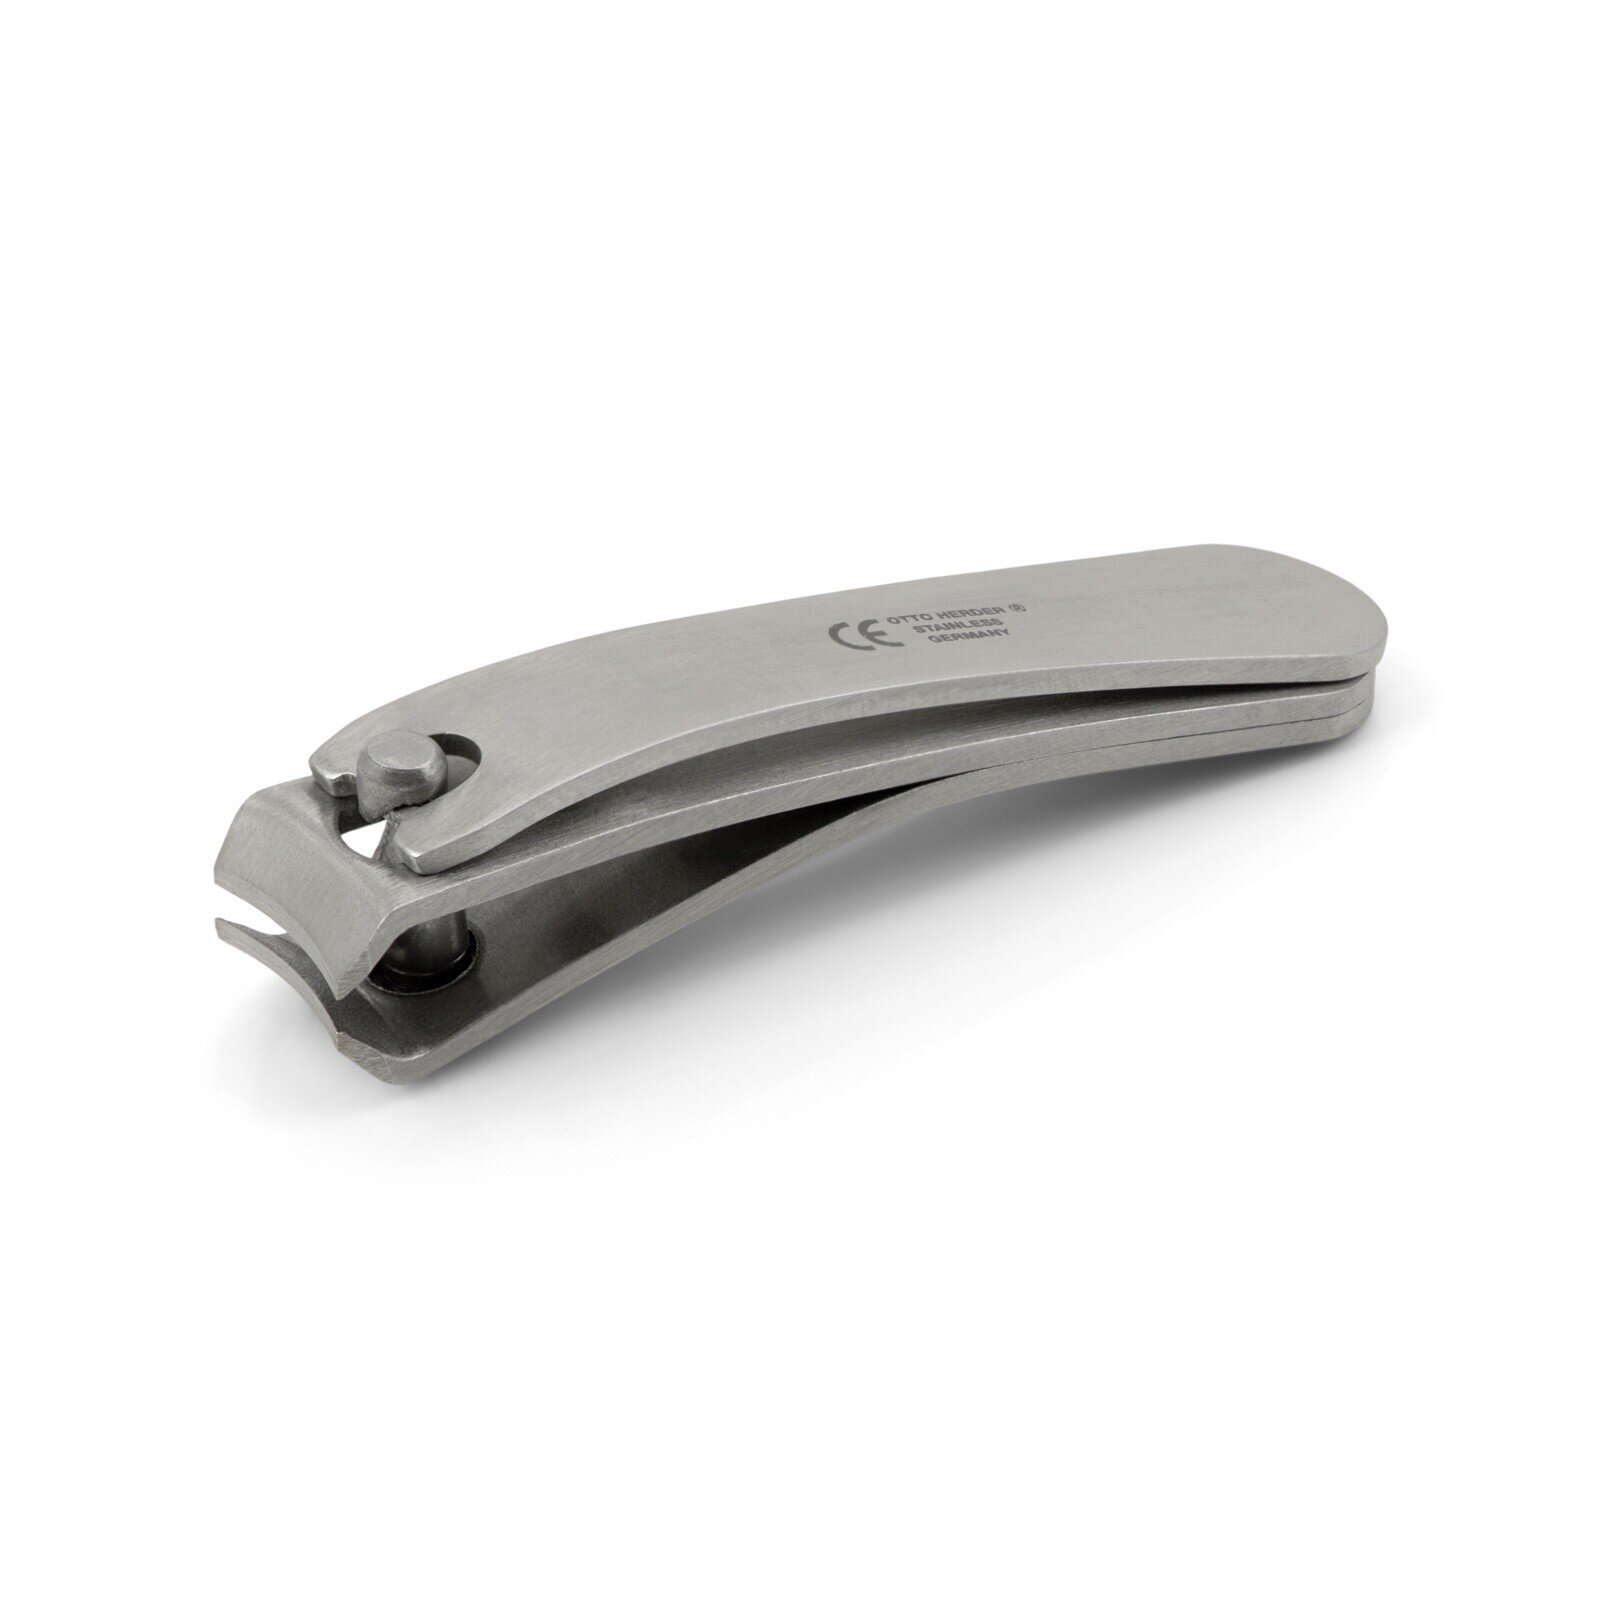 Amazon.com : MUJI nail clipper Made in Japan Small 6cm : Nail Files And  Buffers : Beauty & Personal Care